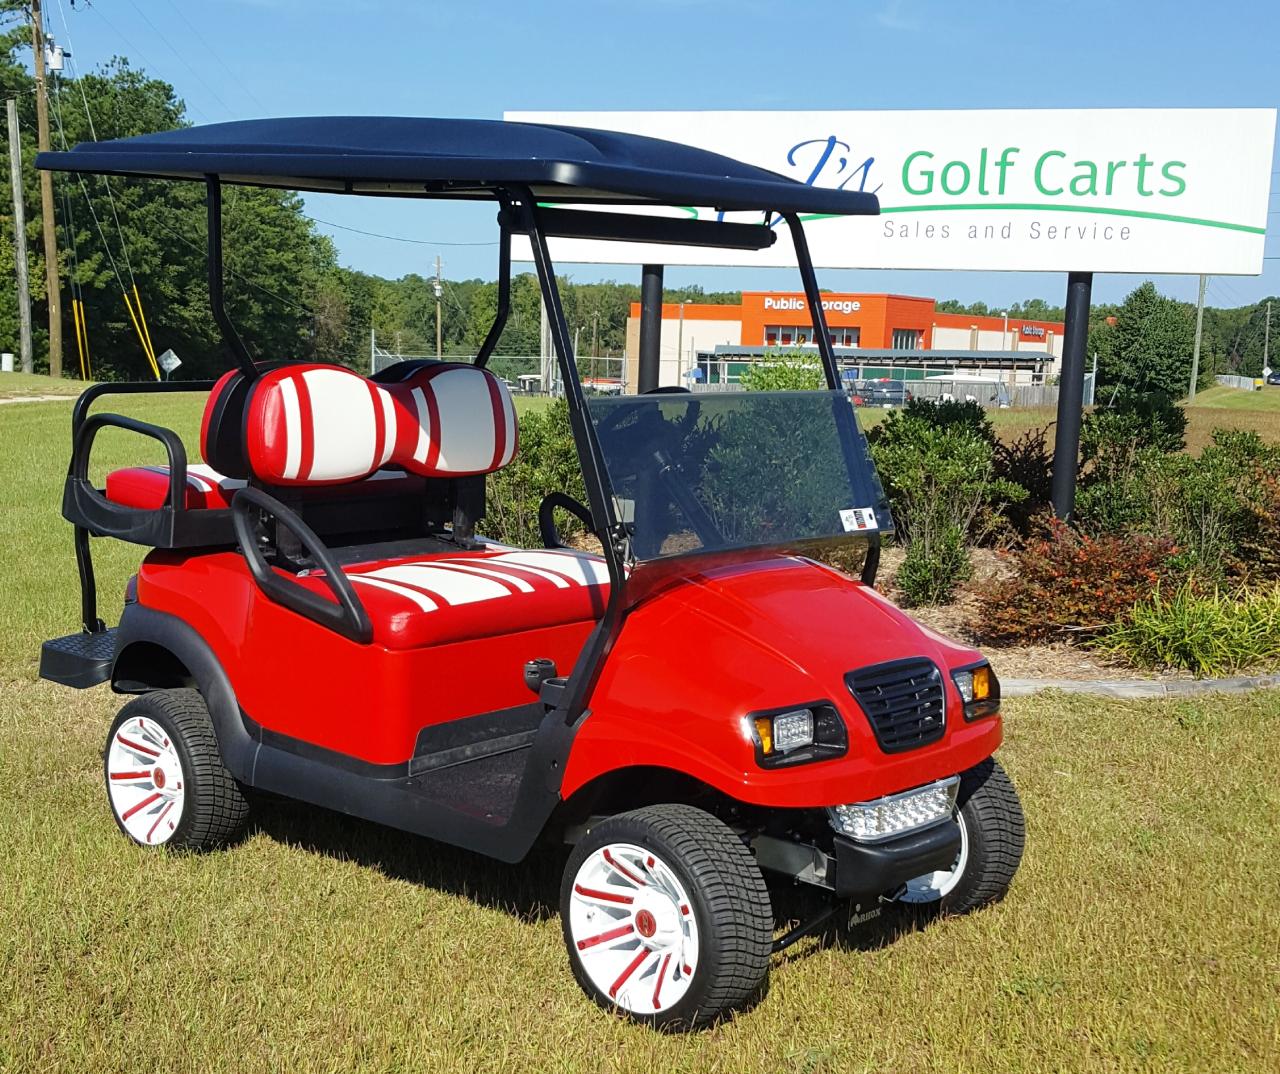 Used Golf Carts for Sale by Owner in Jackson, West Virginia: A Comprehensive Guide